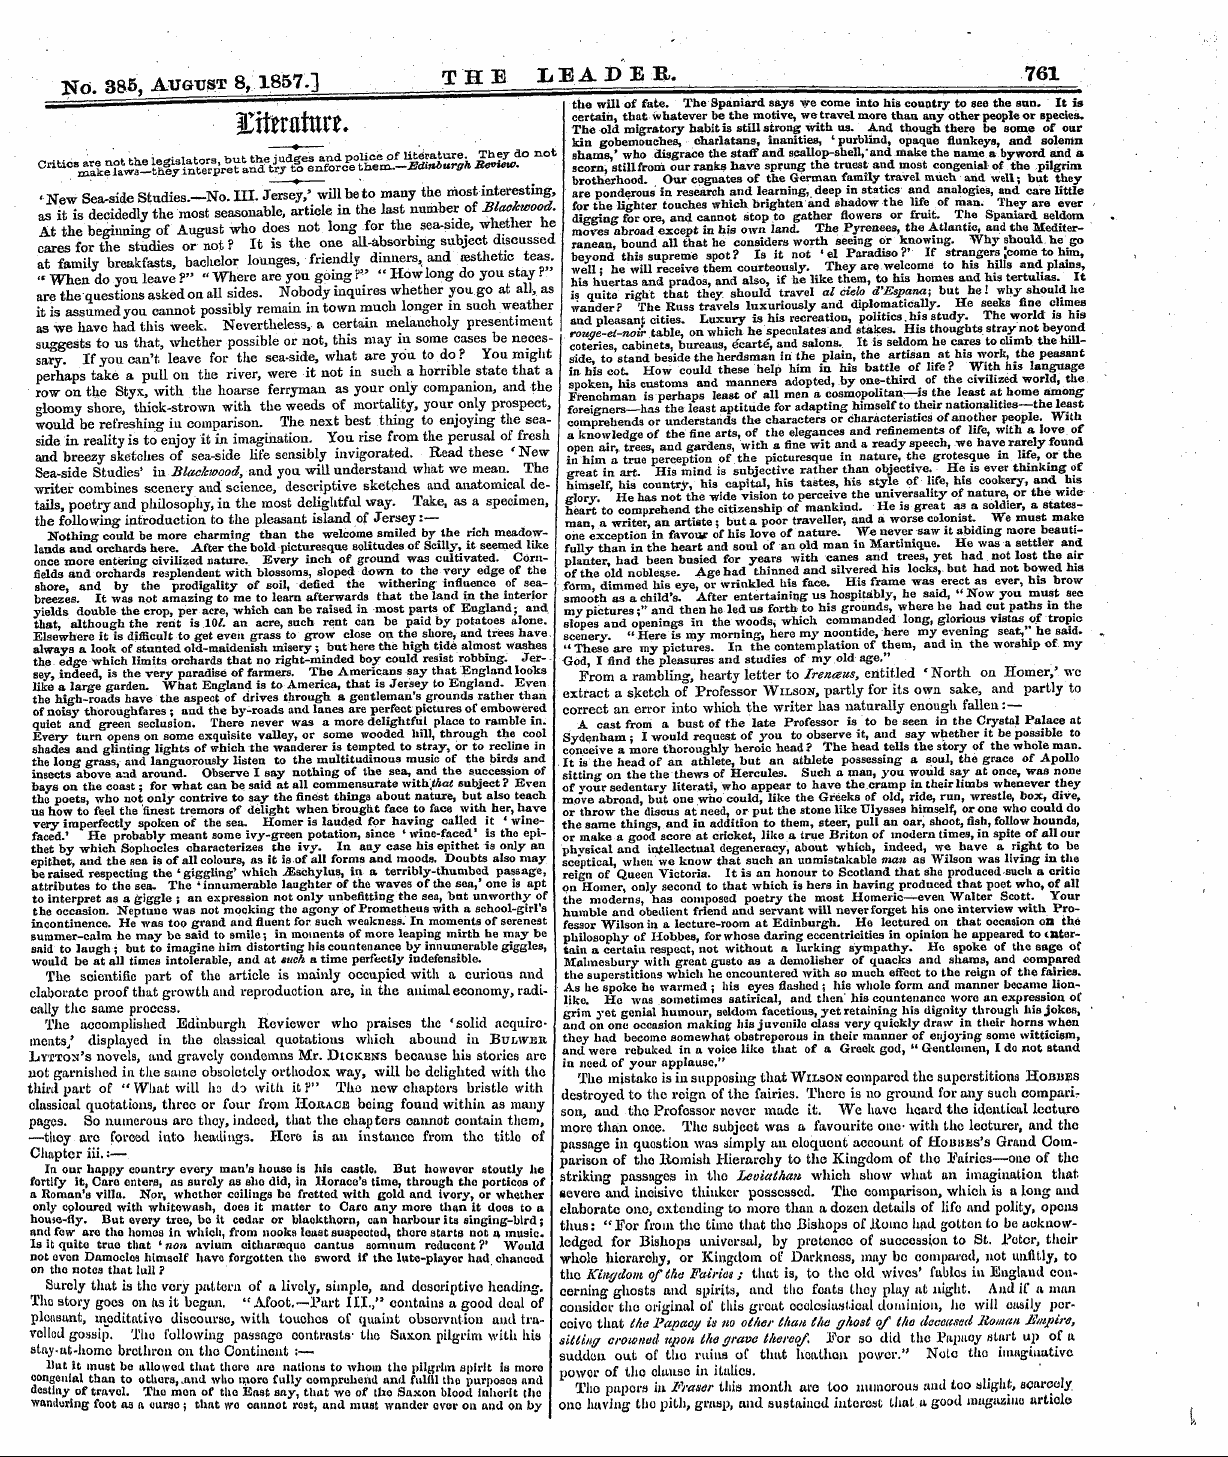 Leader (1850-1860): jS F Y, 2nd edition - No. 385, August 8, 1857.]